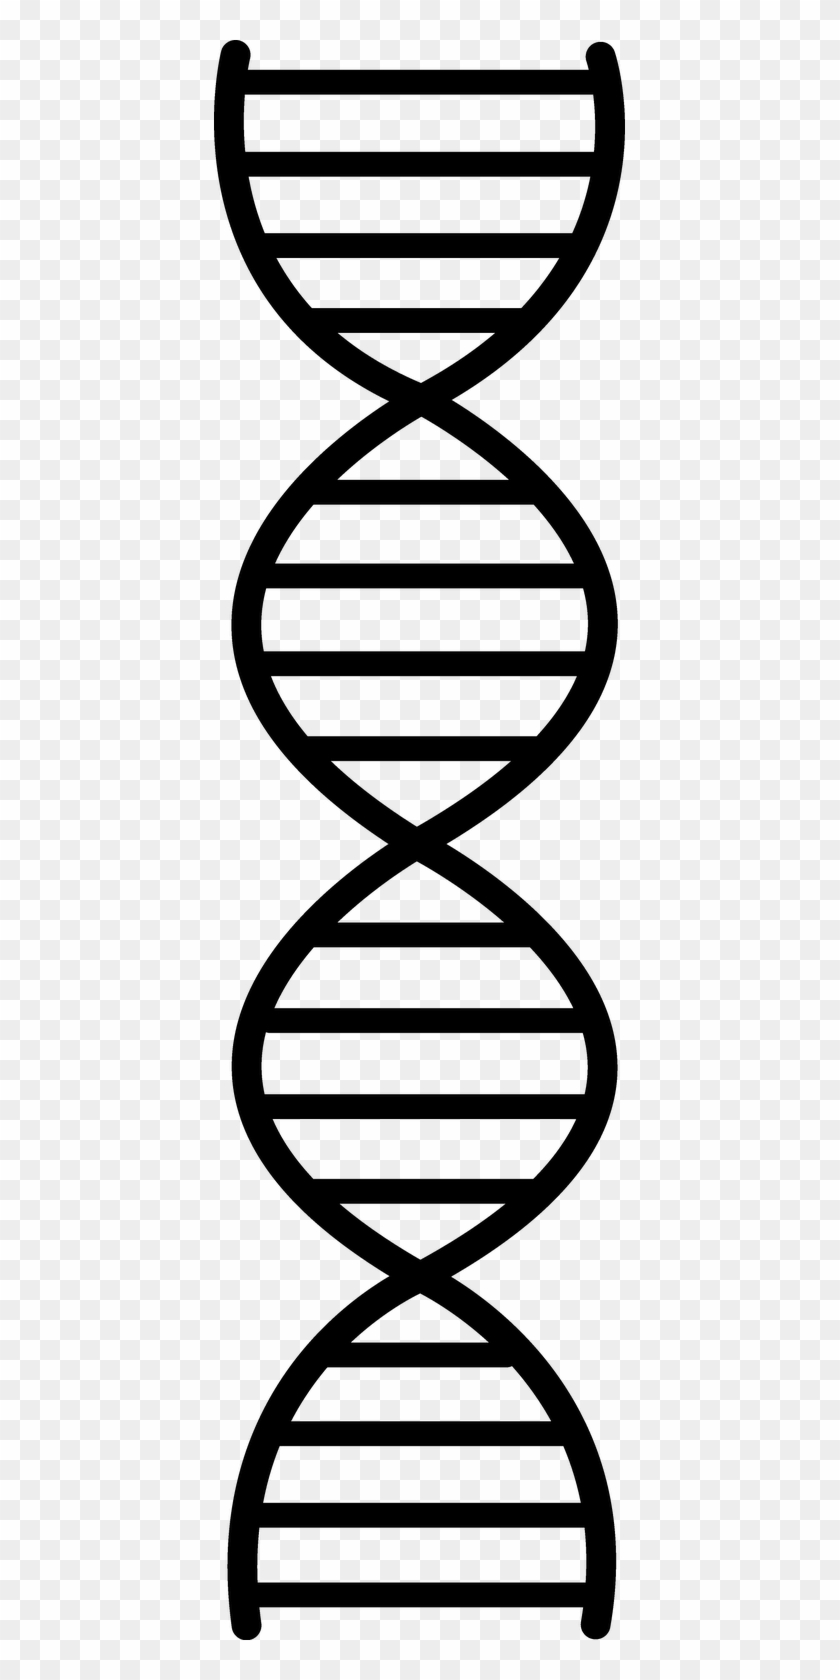 Dna clipart black and white, Dna black and white